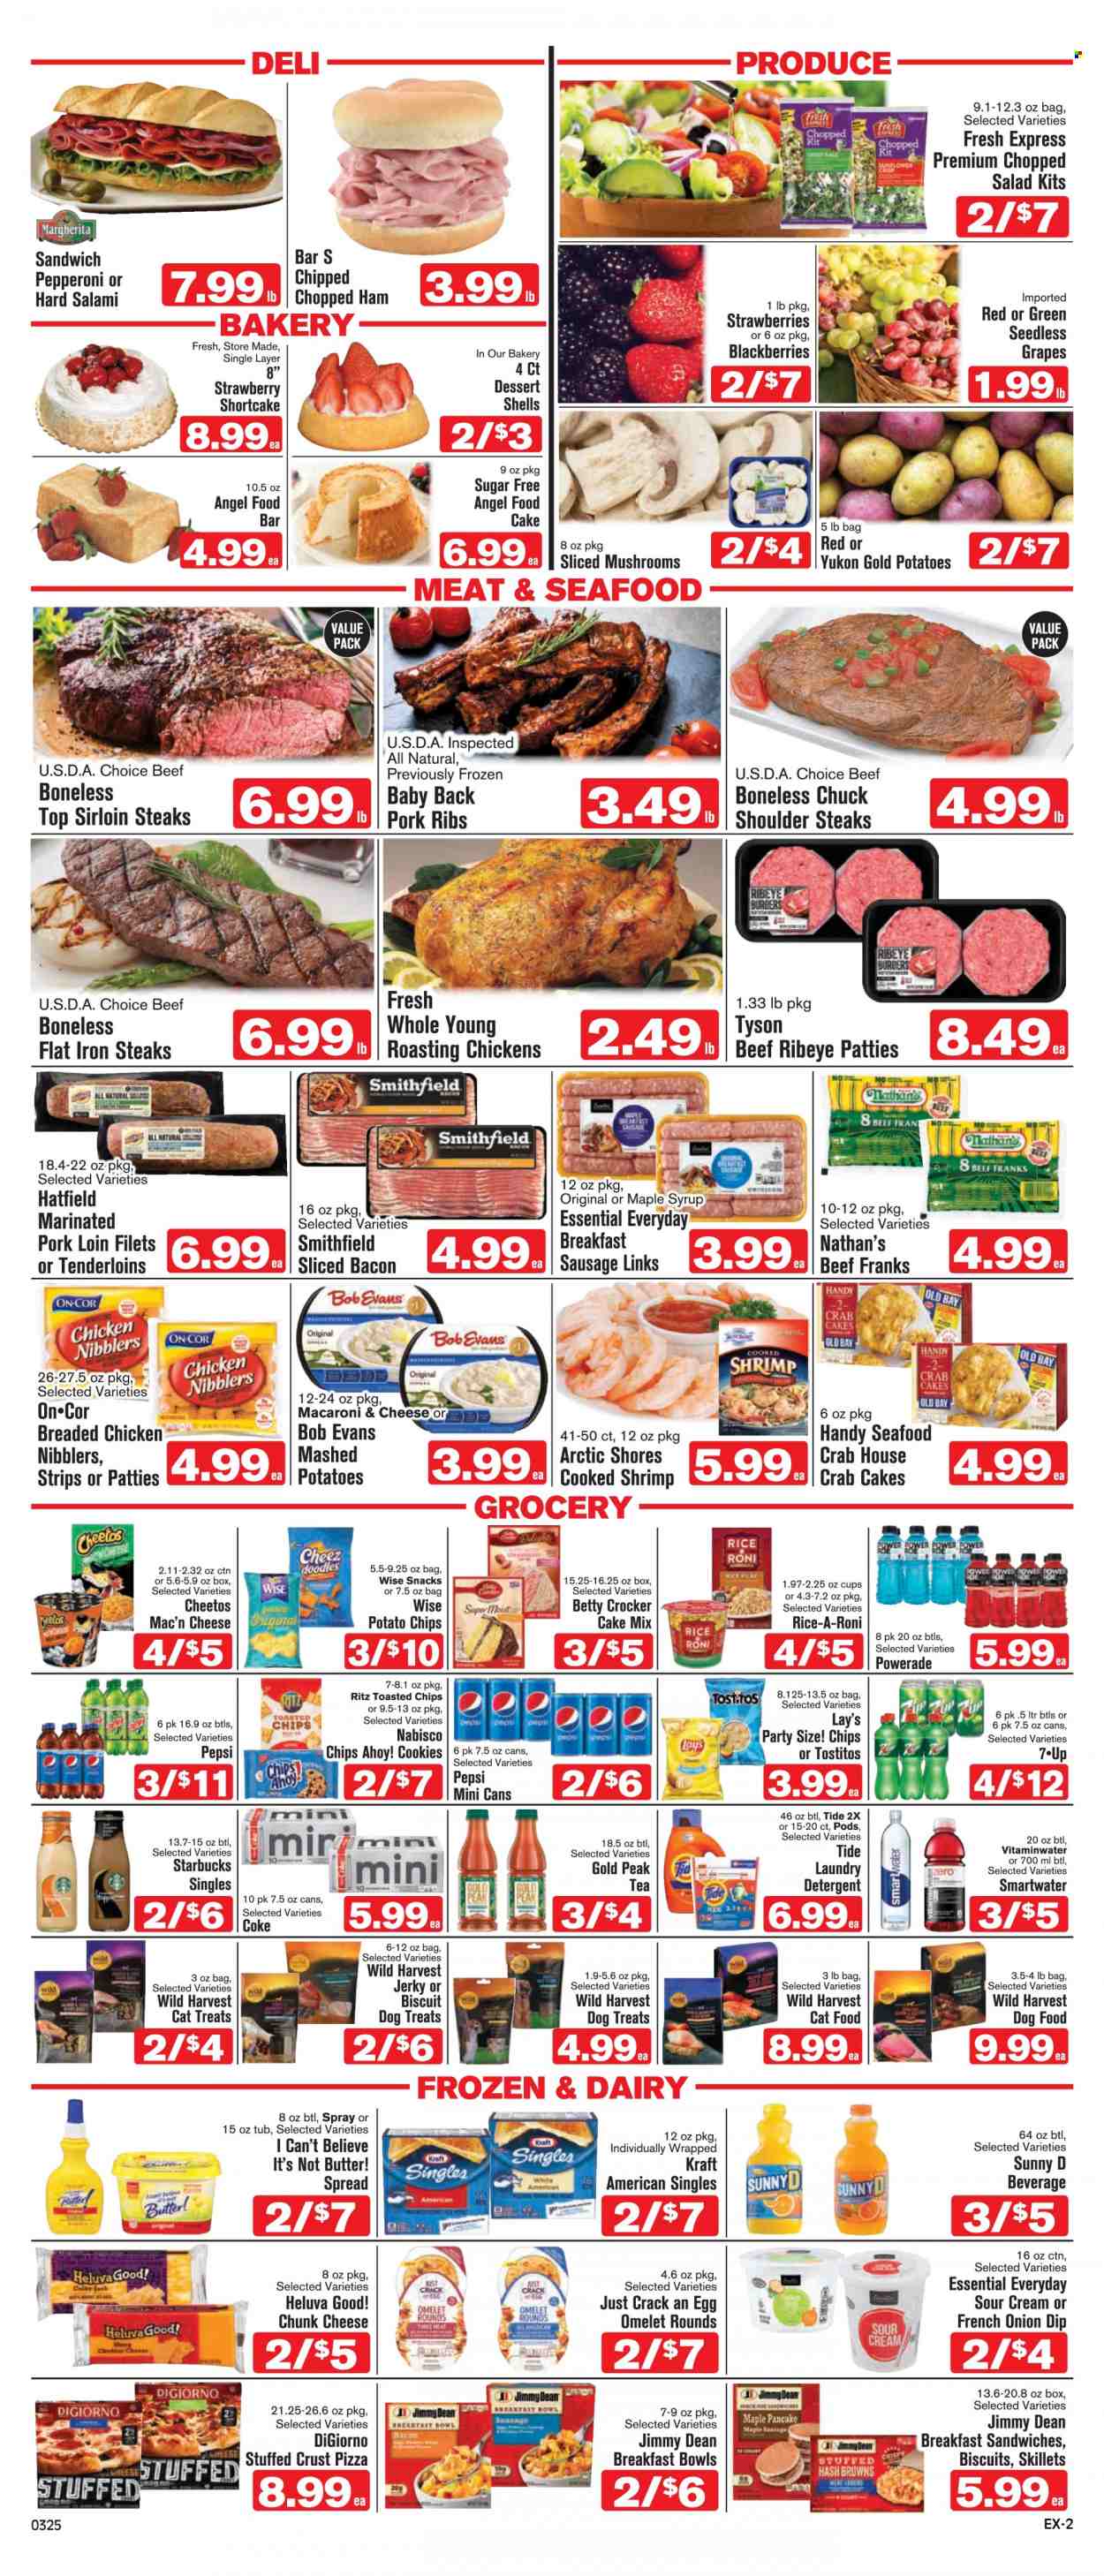 thumbnail - Shop ‘n Save Express Flyer - 03/25/2023 - 03/31/2023 - Sales products - mushrooms, Angel Food, dessert shells, cake mix, kale, salad, Wild Harvest, chopped salad, blackberries, grapes, seedless grapes, strawberries, chicken, steak, sirloin steak, ribs, hamburger, Bob Evans, pork loin, pork meat, pork ribs, pork back ribs, shrimps, Arctic Shores, crab cake, macaroni & cheese, pizza, sandwich, fried chicken, breakfast bowl, pancakes, Kraft®, Jimmy Dean, bacon, salami, ham, jerky, sausage, pepperoni, Colby cheese, sandwich slices, Kraft Singles, chunk cheese, I Can't Believe It's Not Butter, sour cream, dip, strips, hash browns, cookies, snack, biscuit, Chips Ahoy!, RITZ, potato chips, Cheetos, Lay’s, Tostitos, maple syrup, syrup, Coca-Cola, Powerade, Pepsi, Gold Peak Tea, Coke, Smartwater, tea, Starbucks, detergent, Tide, laundry detergent, animal food, cat food, dog food. Page 2.